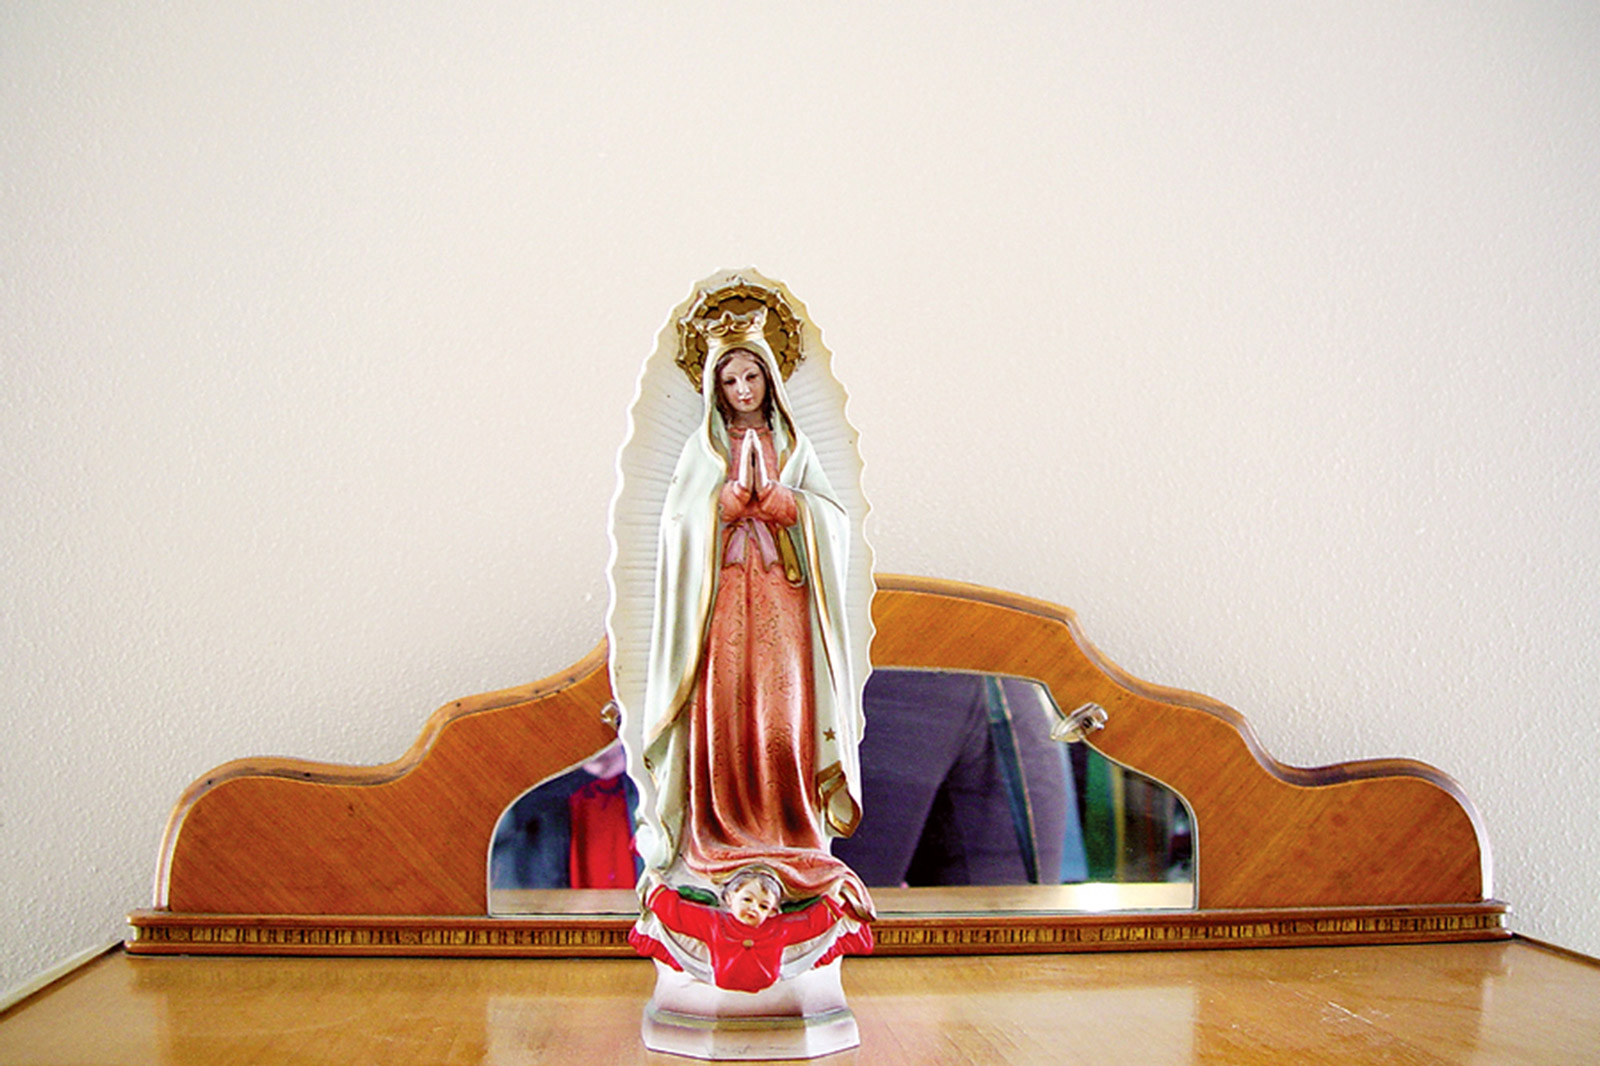 A photograph titled “Reminder to Be Kind and Thoughtful” of a religious statuette, from Casey Logan’s two thousand and seven artist project titled “Shopping in Sin.”